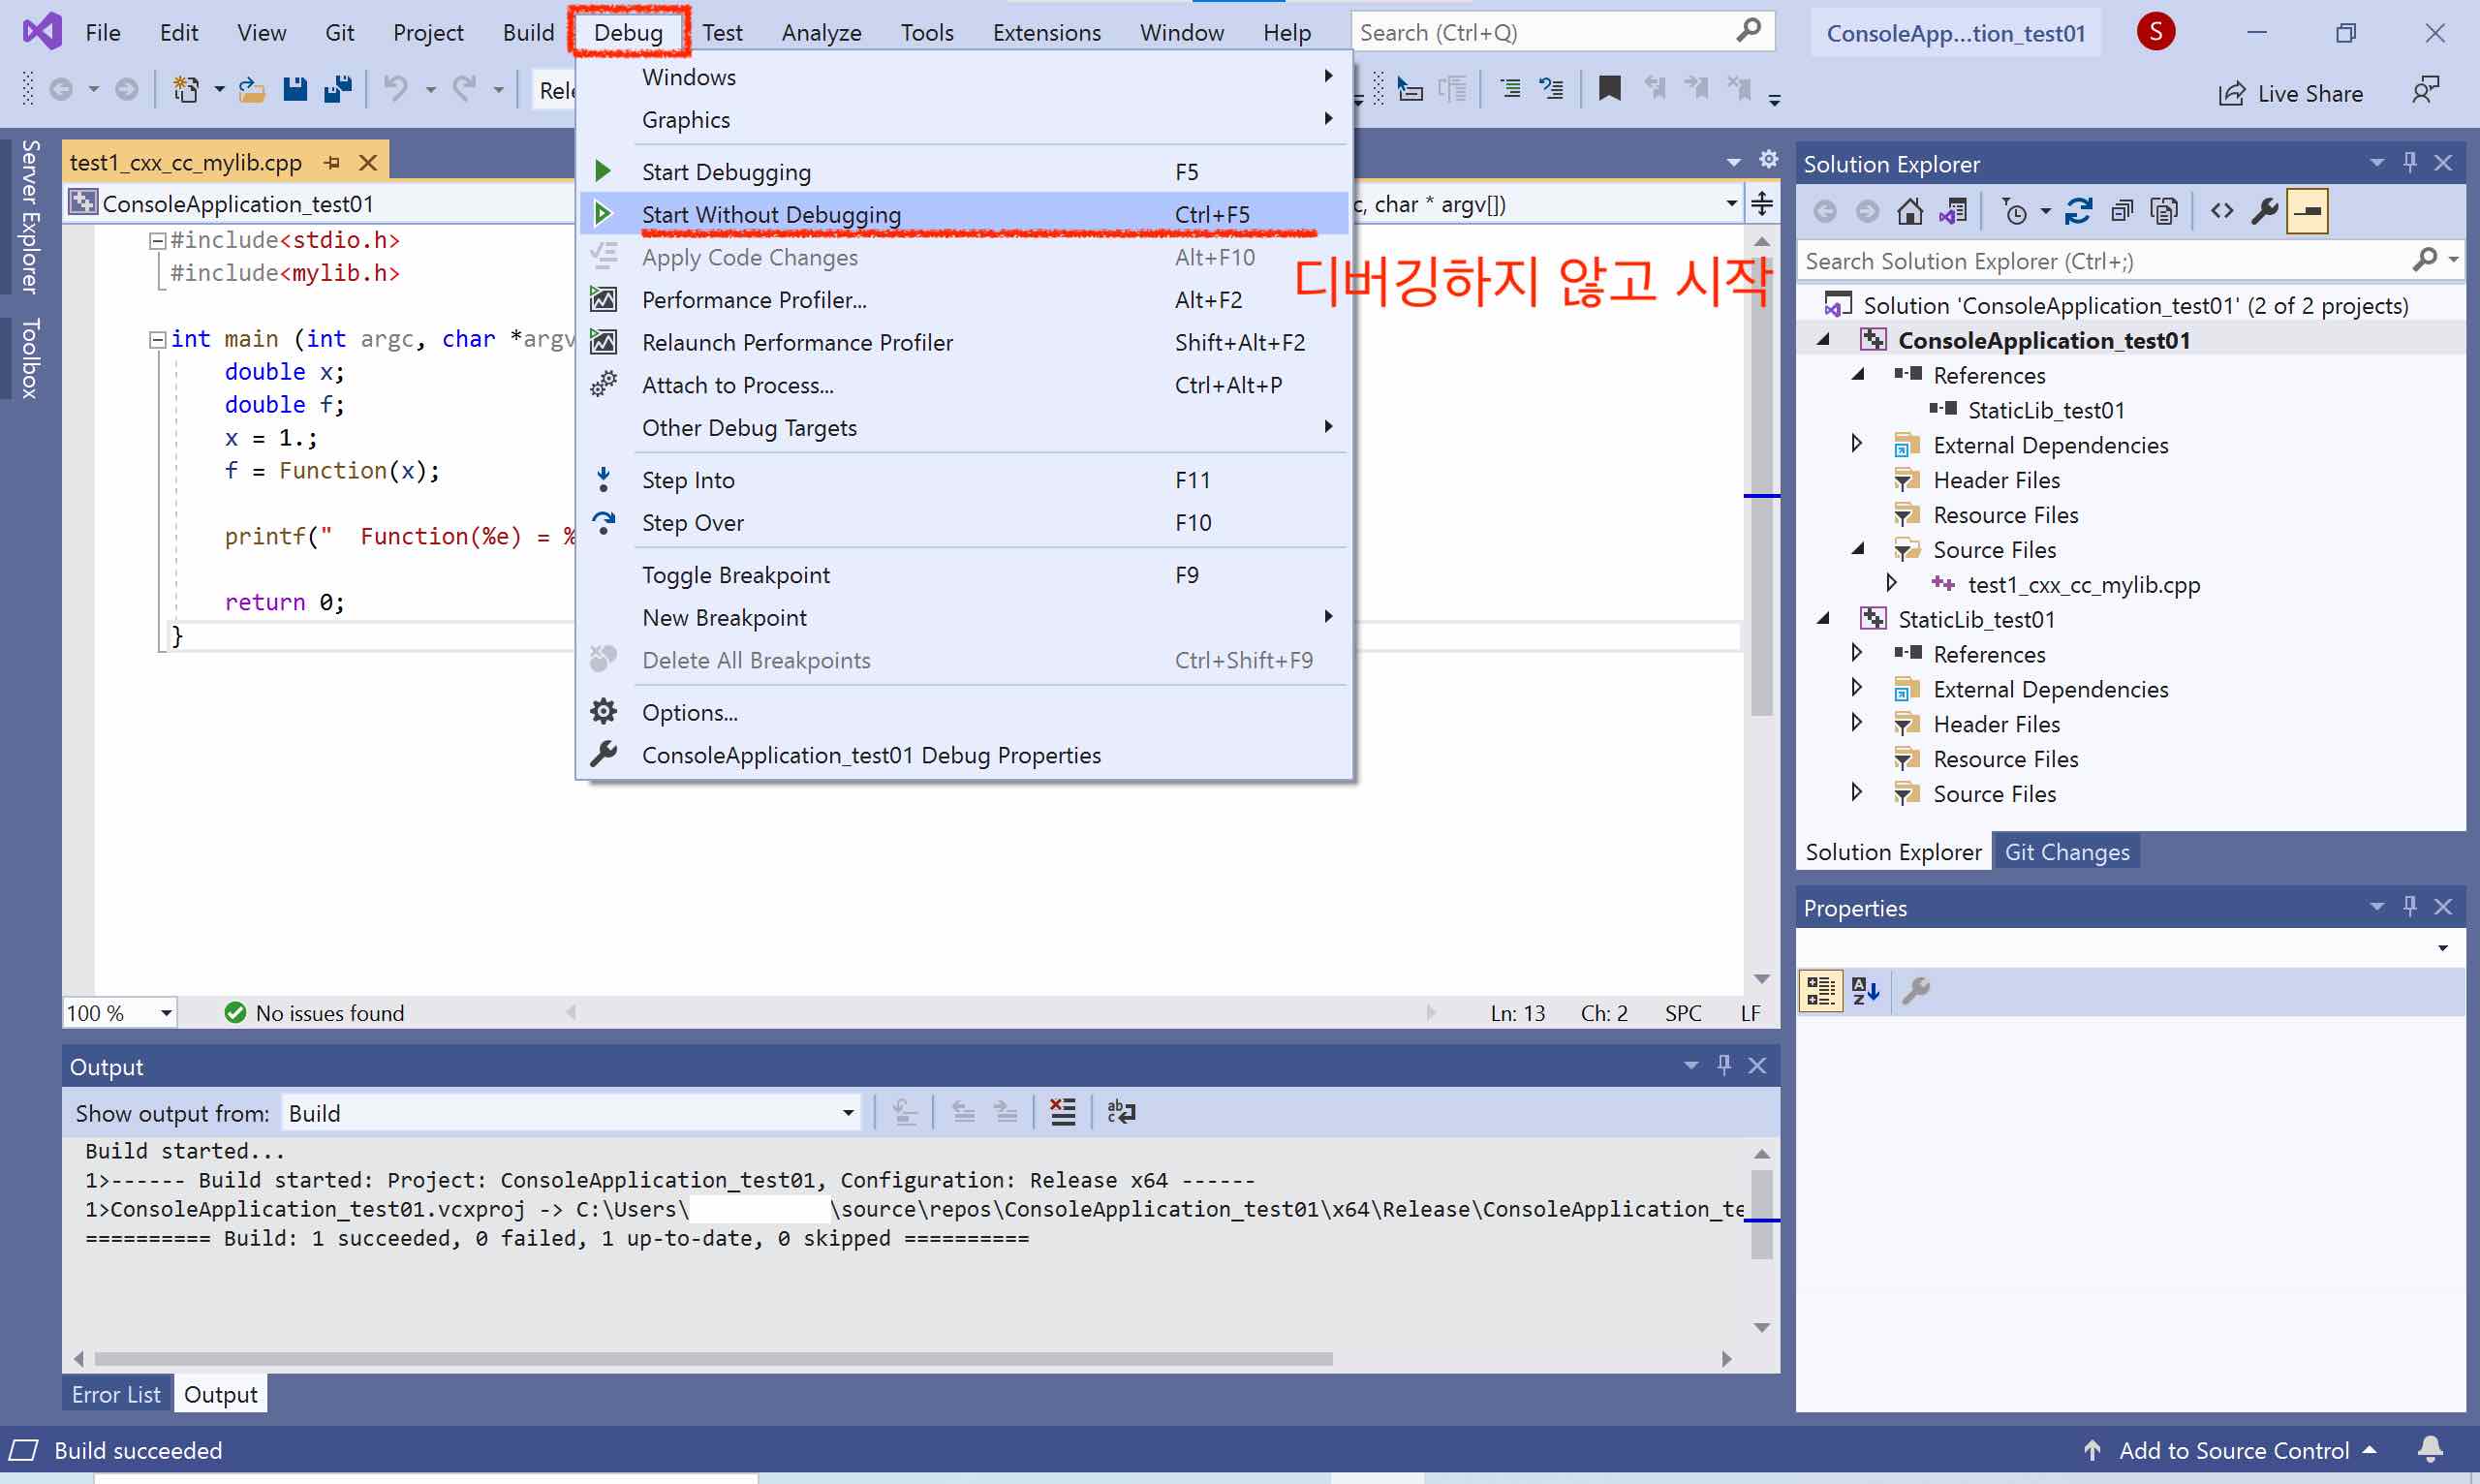 screenshot of Visual Studio Community 2019, showing button to start without debuggging